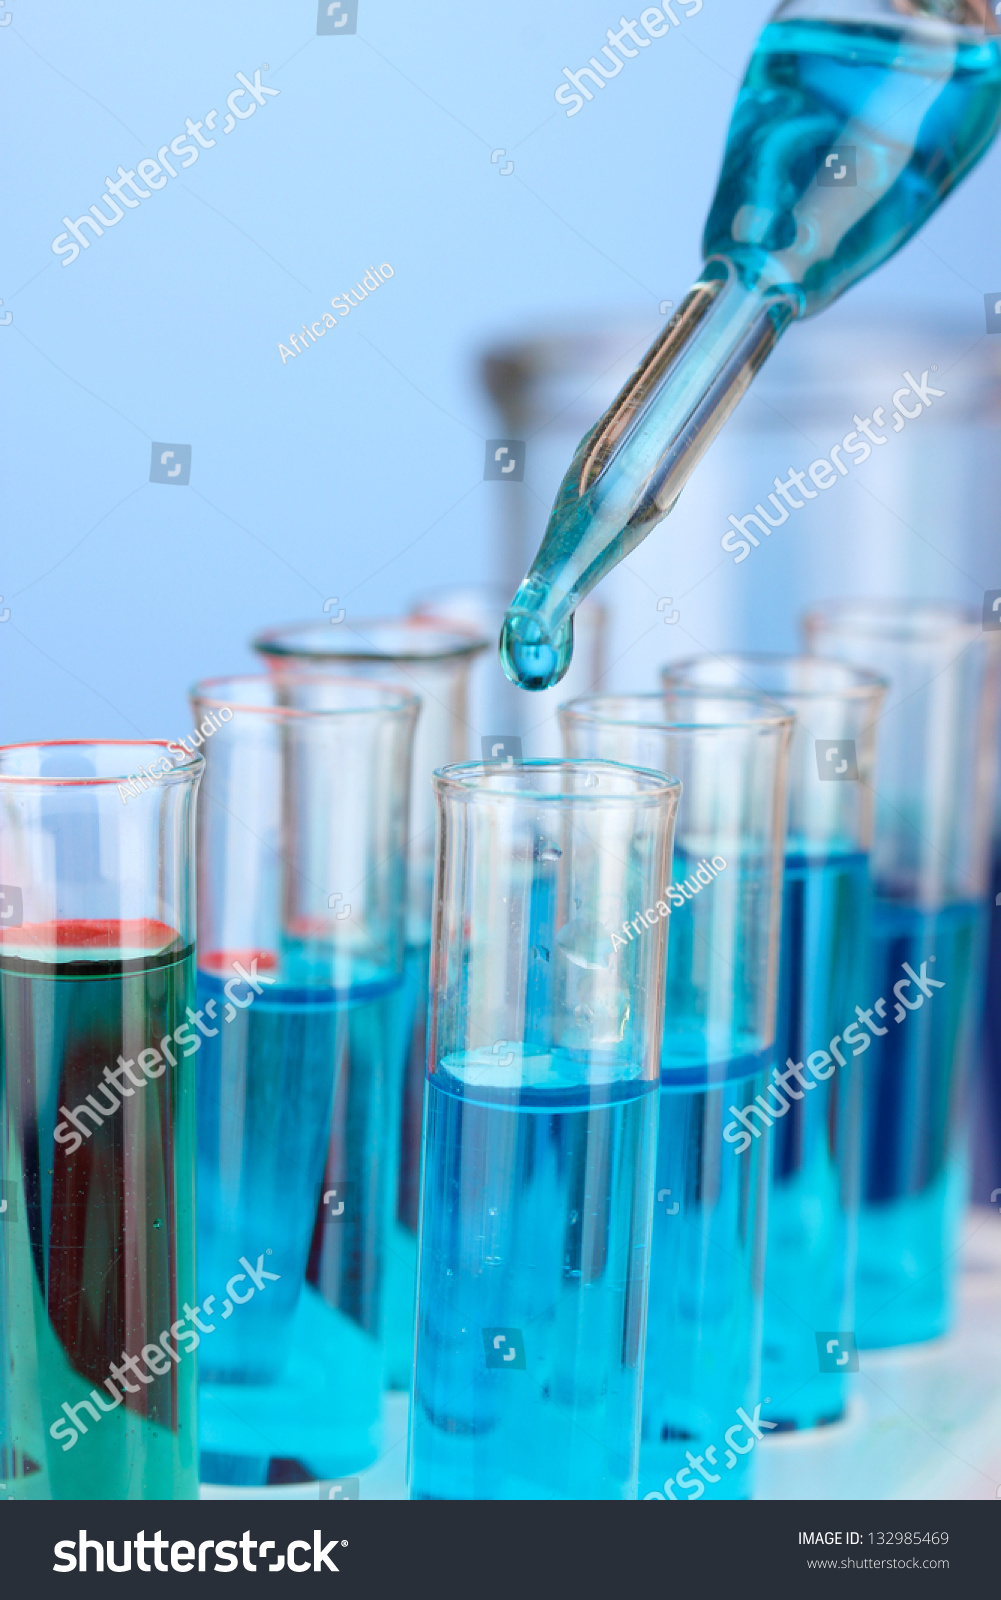 Laboratory pipette with drop of color liquid over glass test tubes, close up #132985469